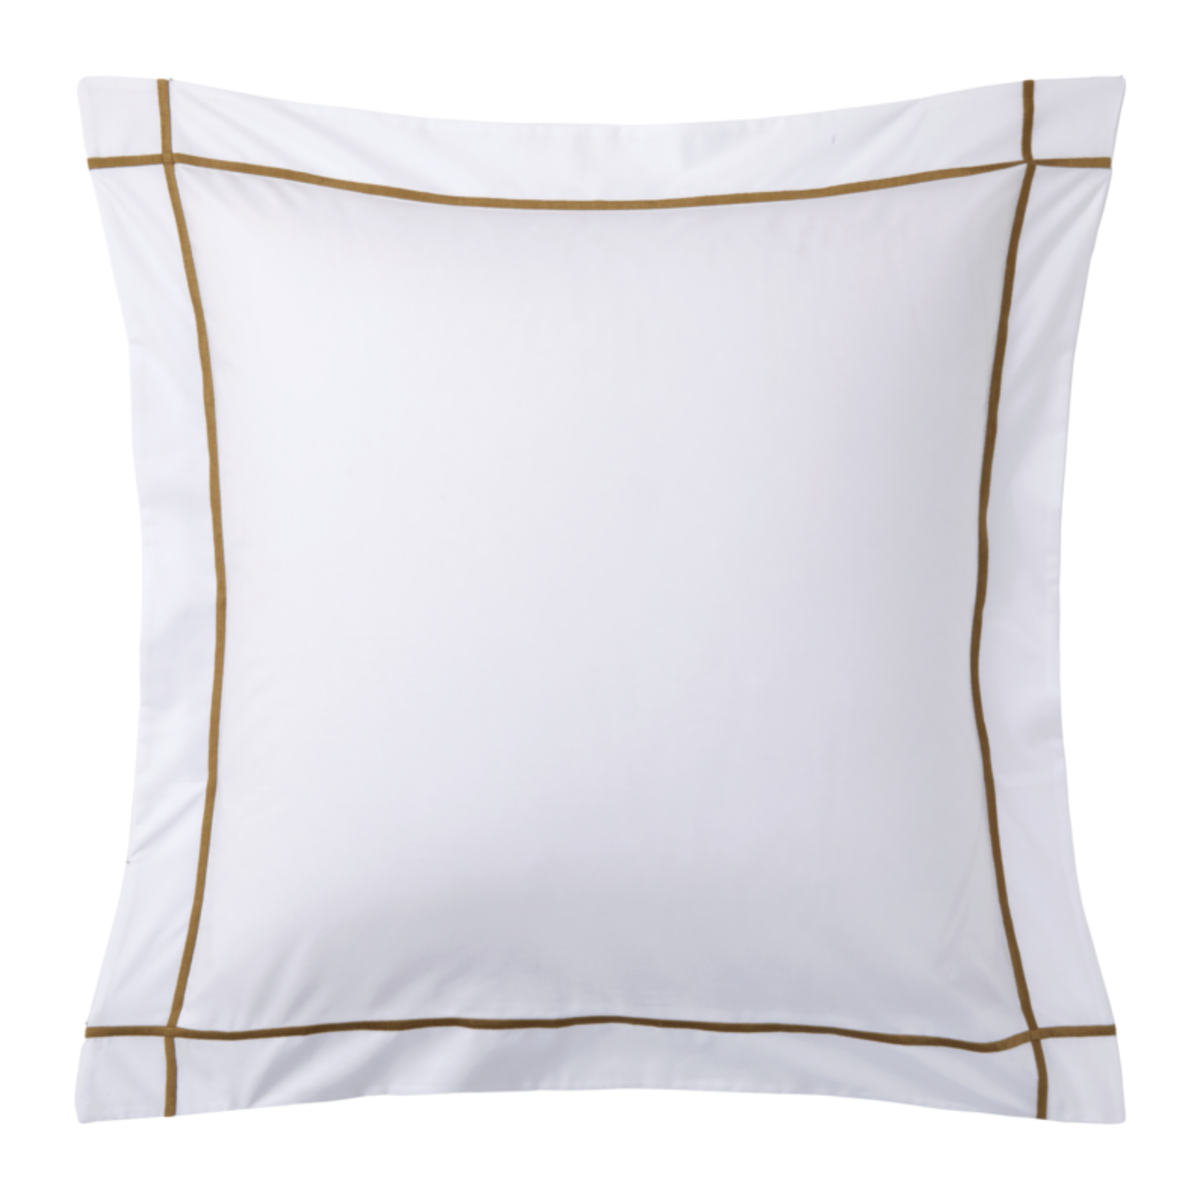 Euro Sham of Yves Delorme Athena Bedding in Bronze Color